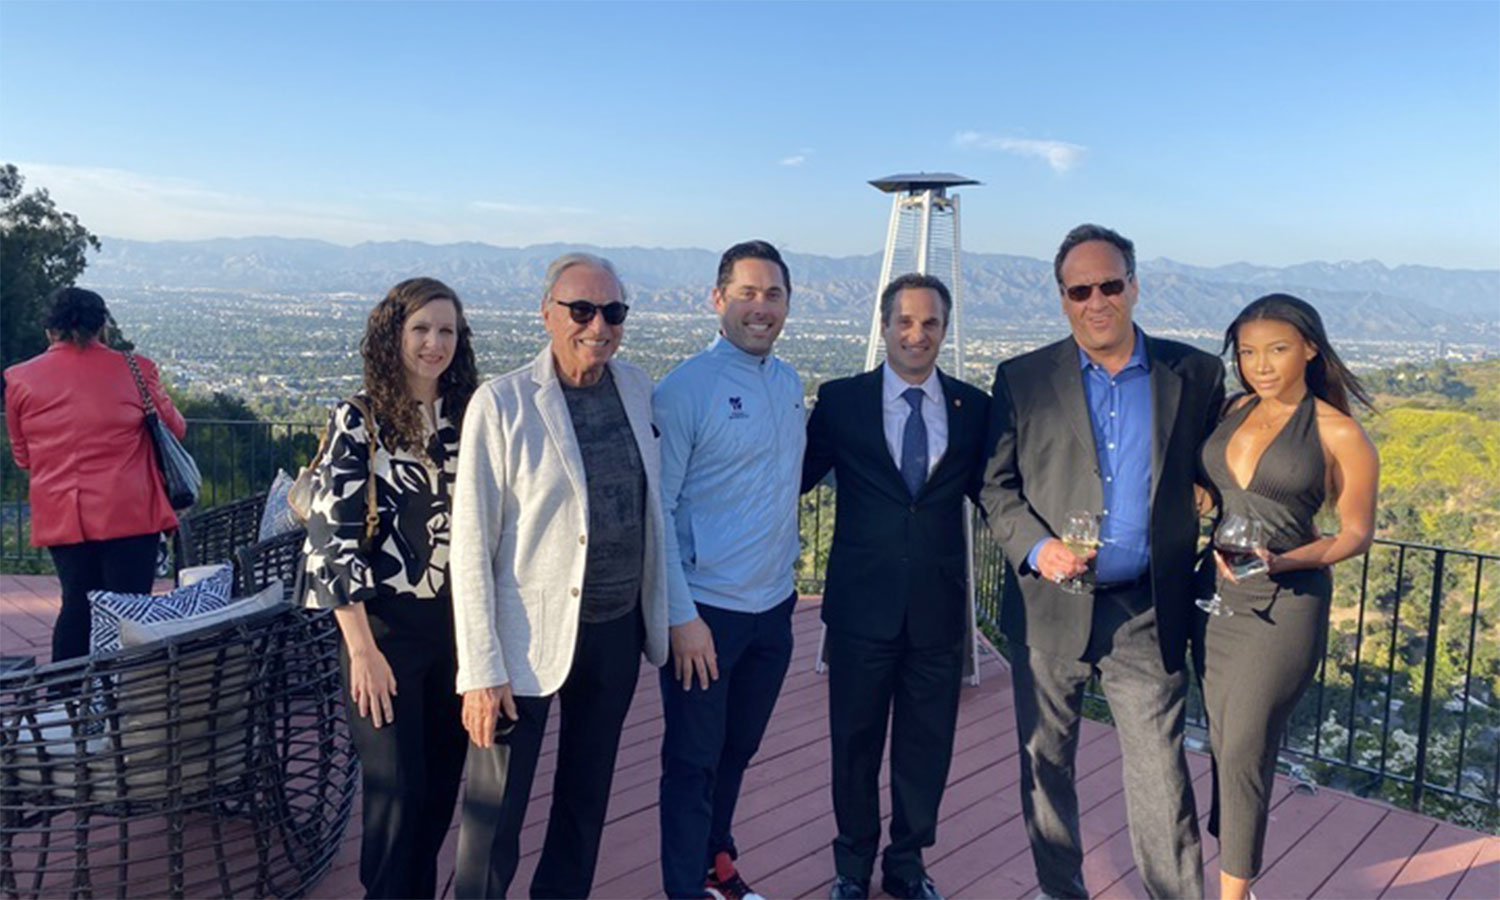 barak raviv fourth from left hosted the afmda event in his beverly hills home 720